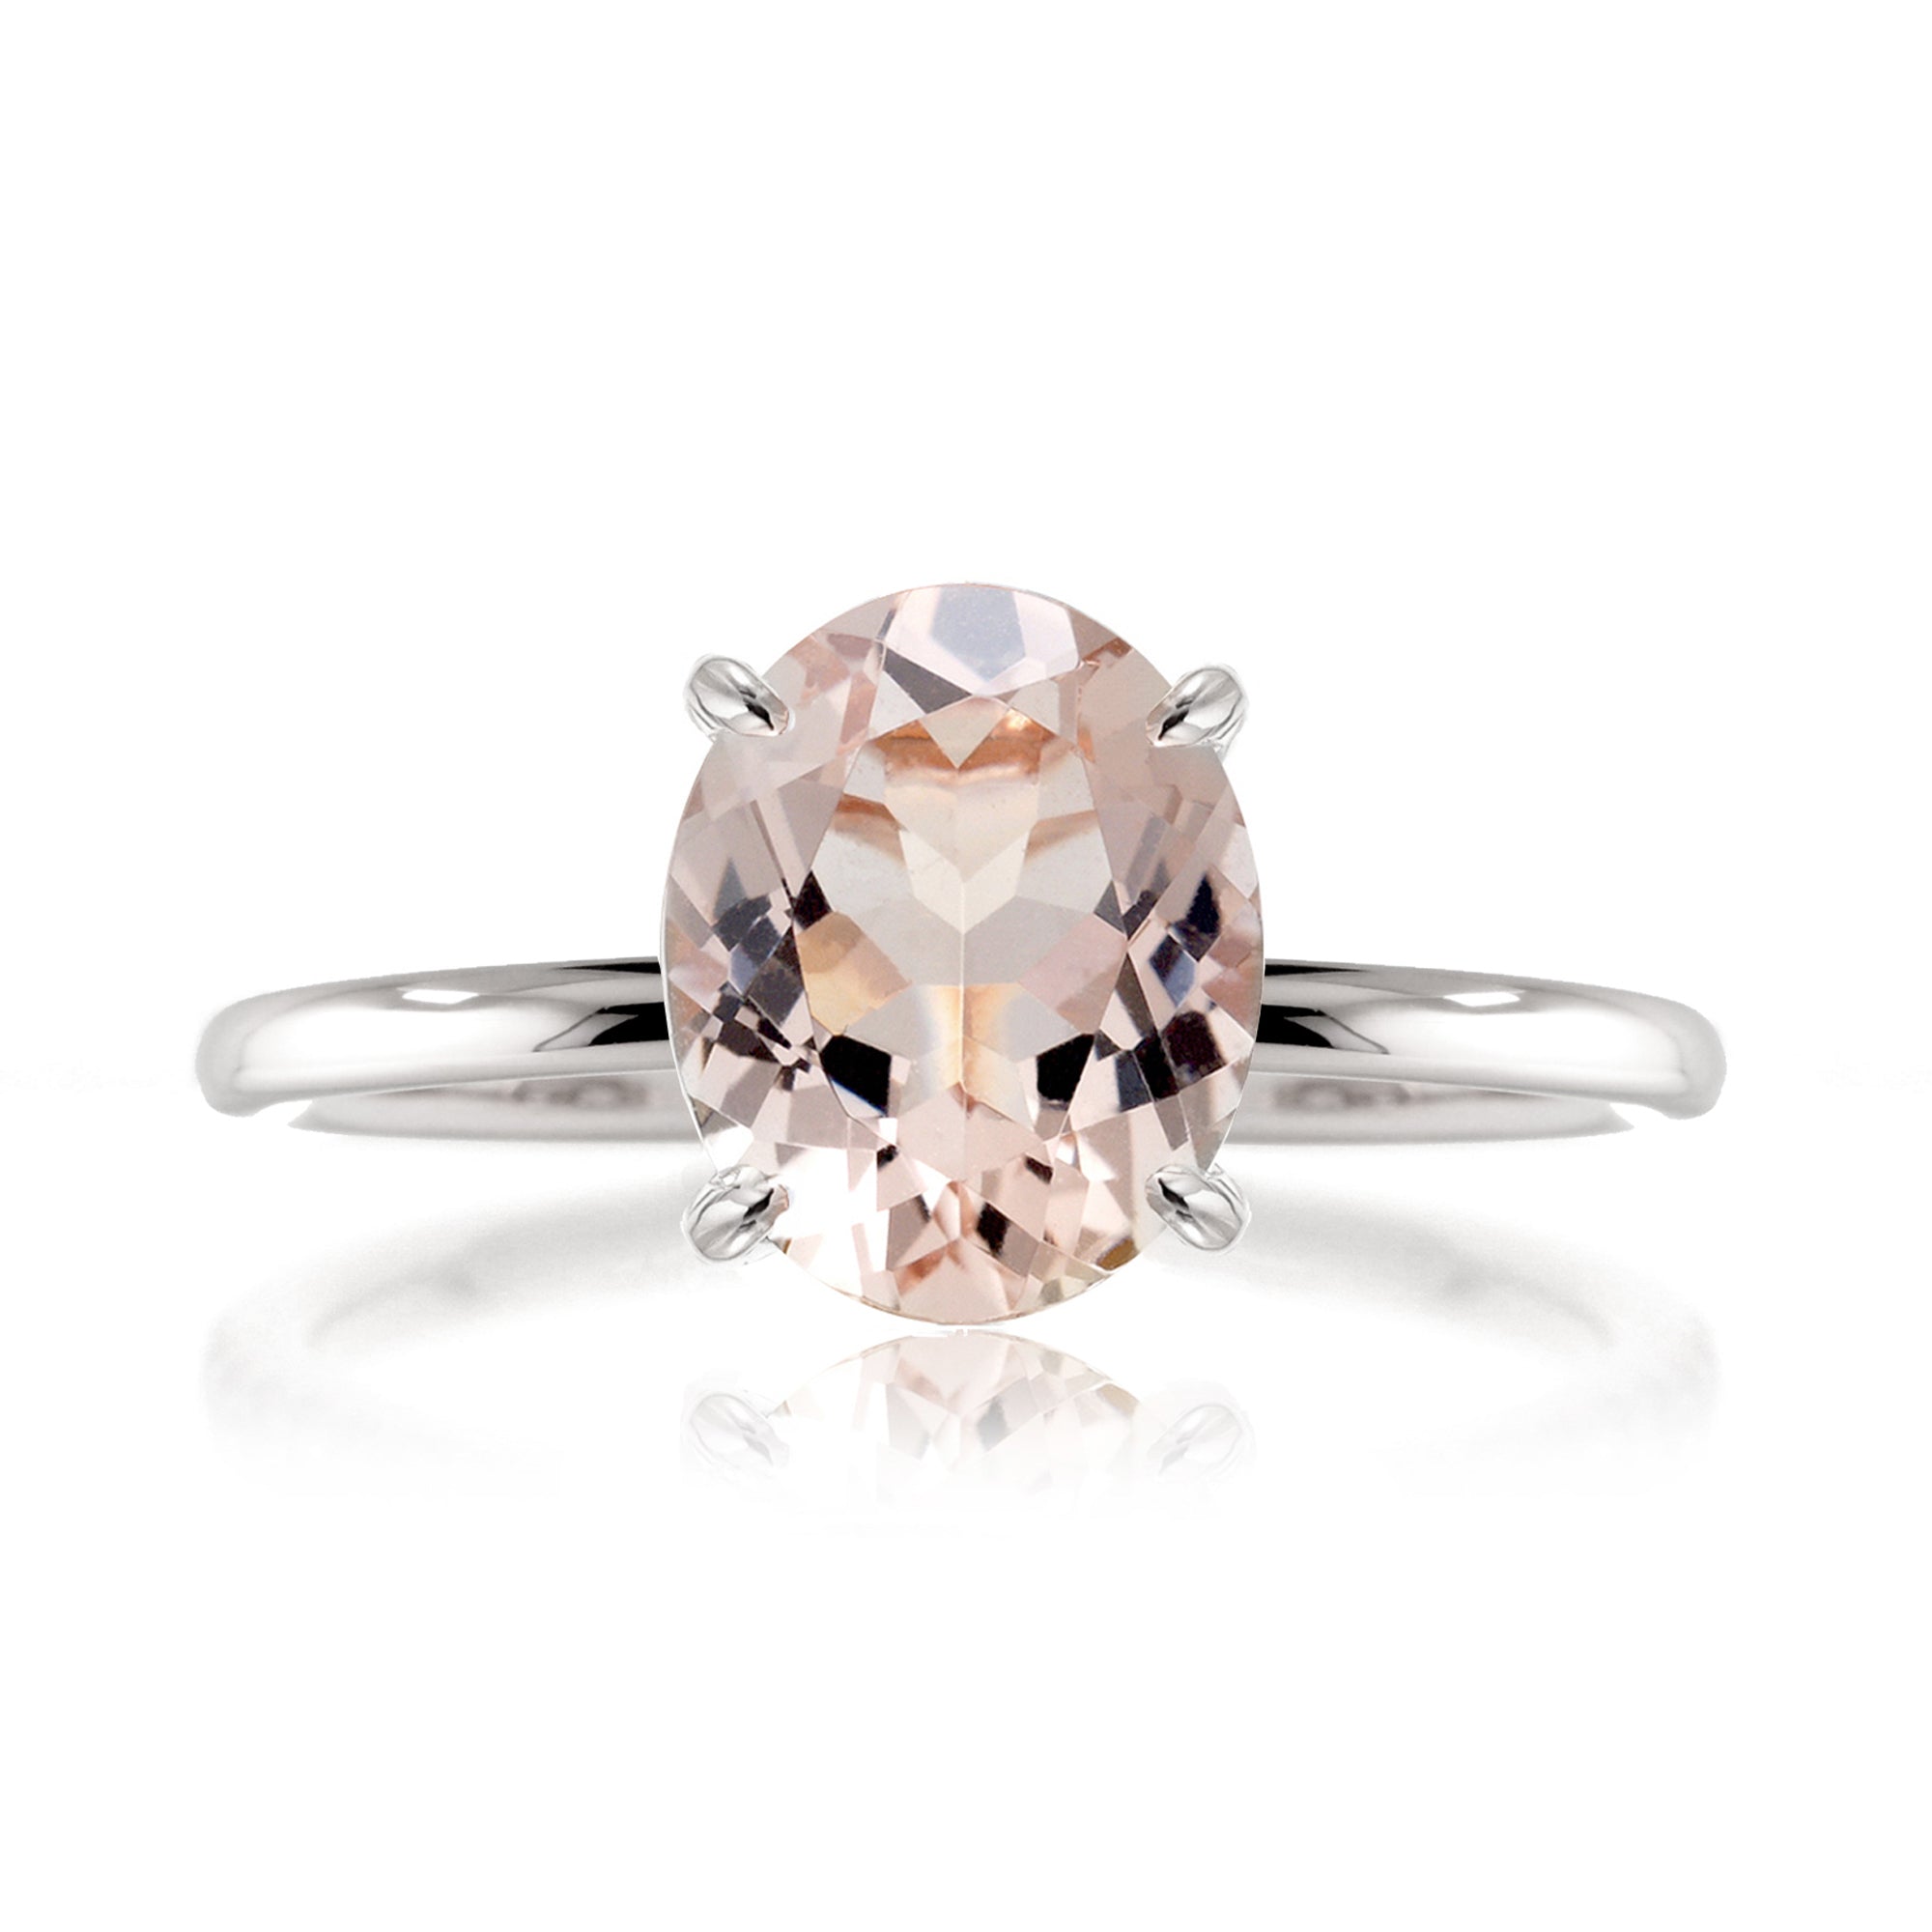 Oval morganite solid band engagement ring white gold - The Ava